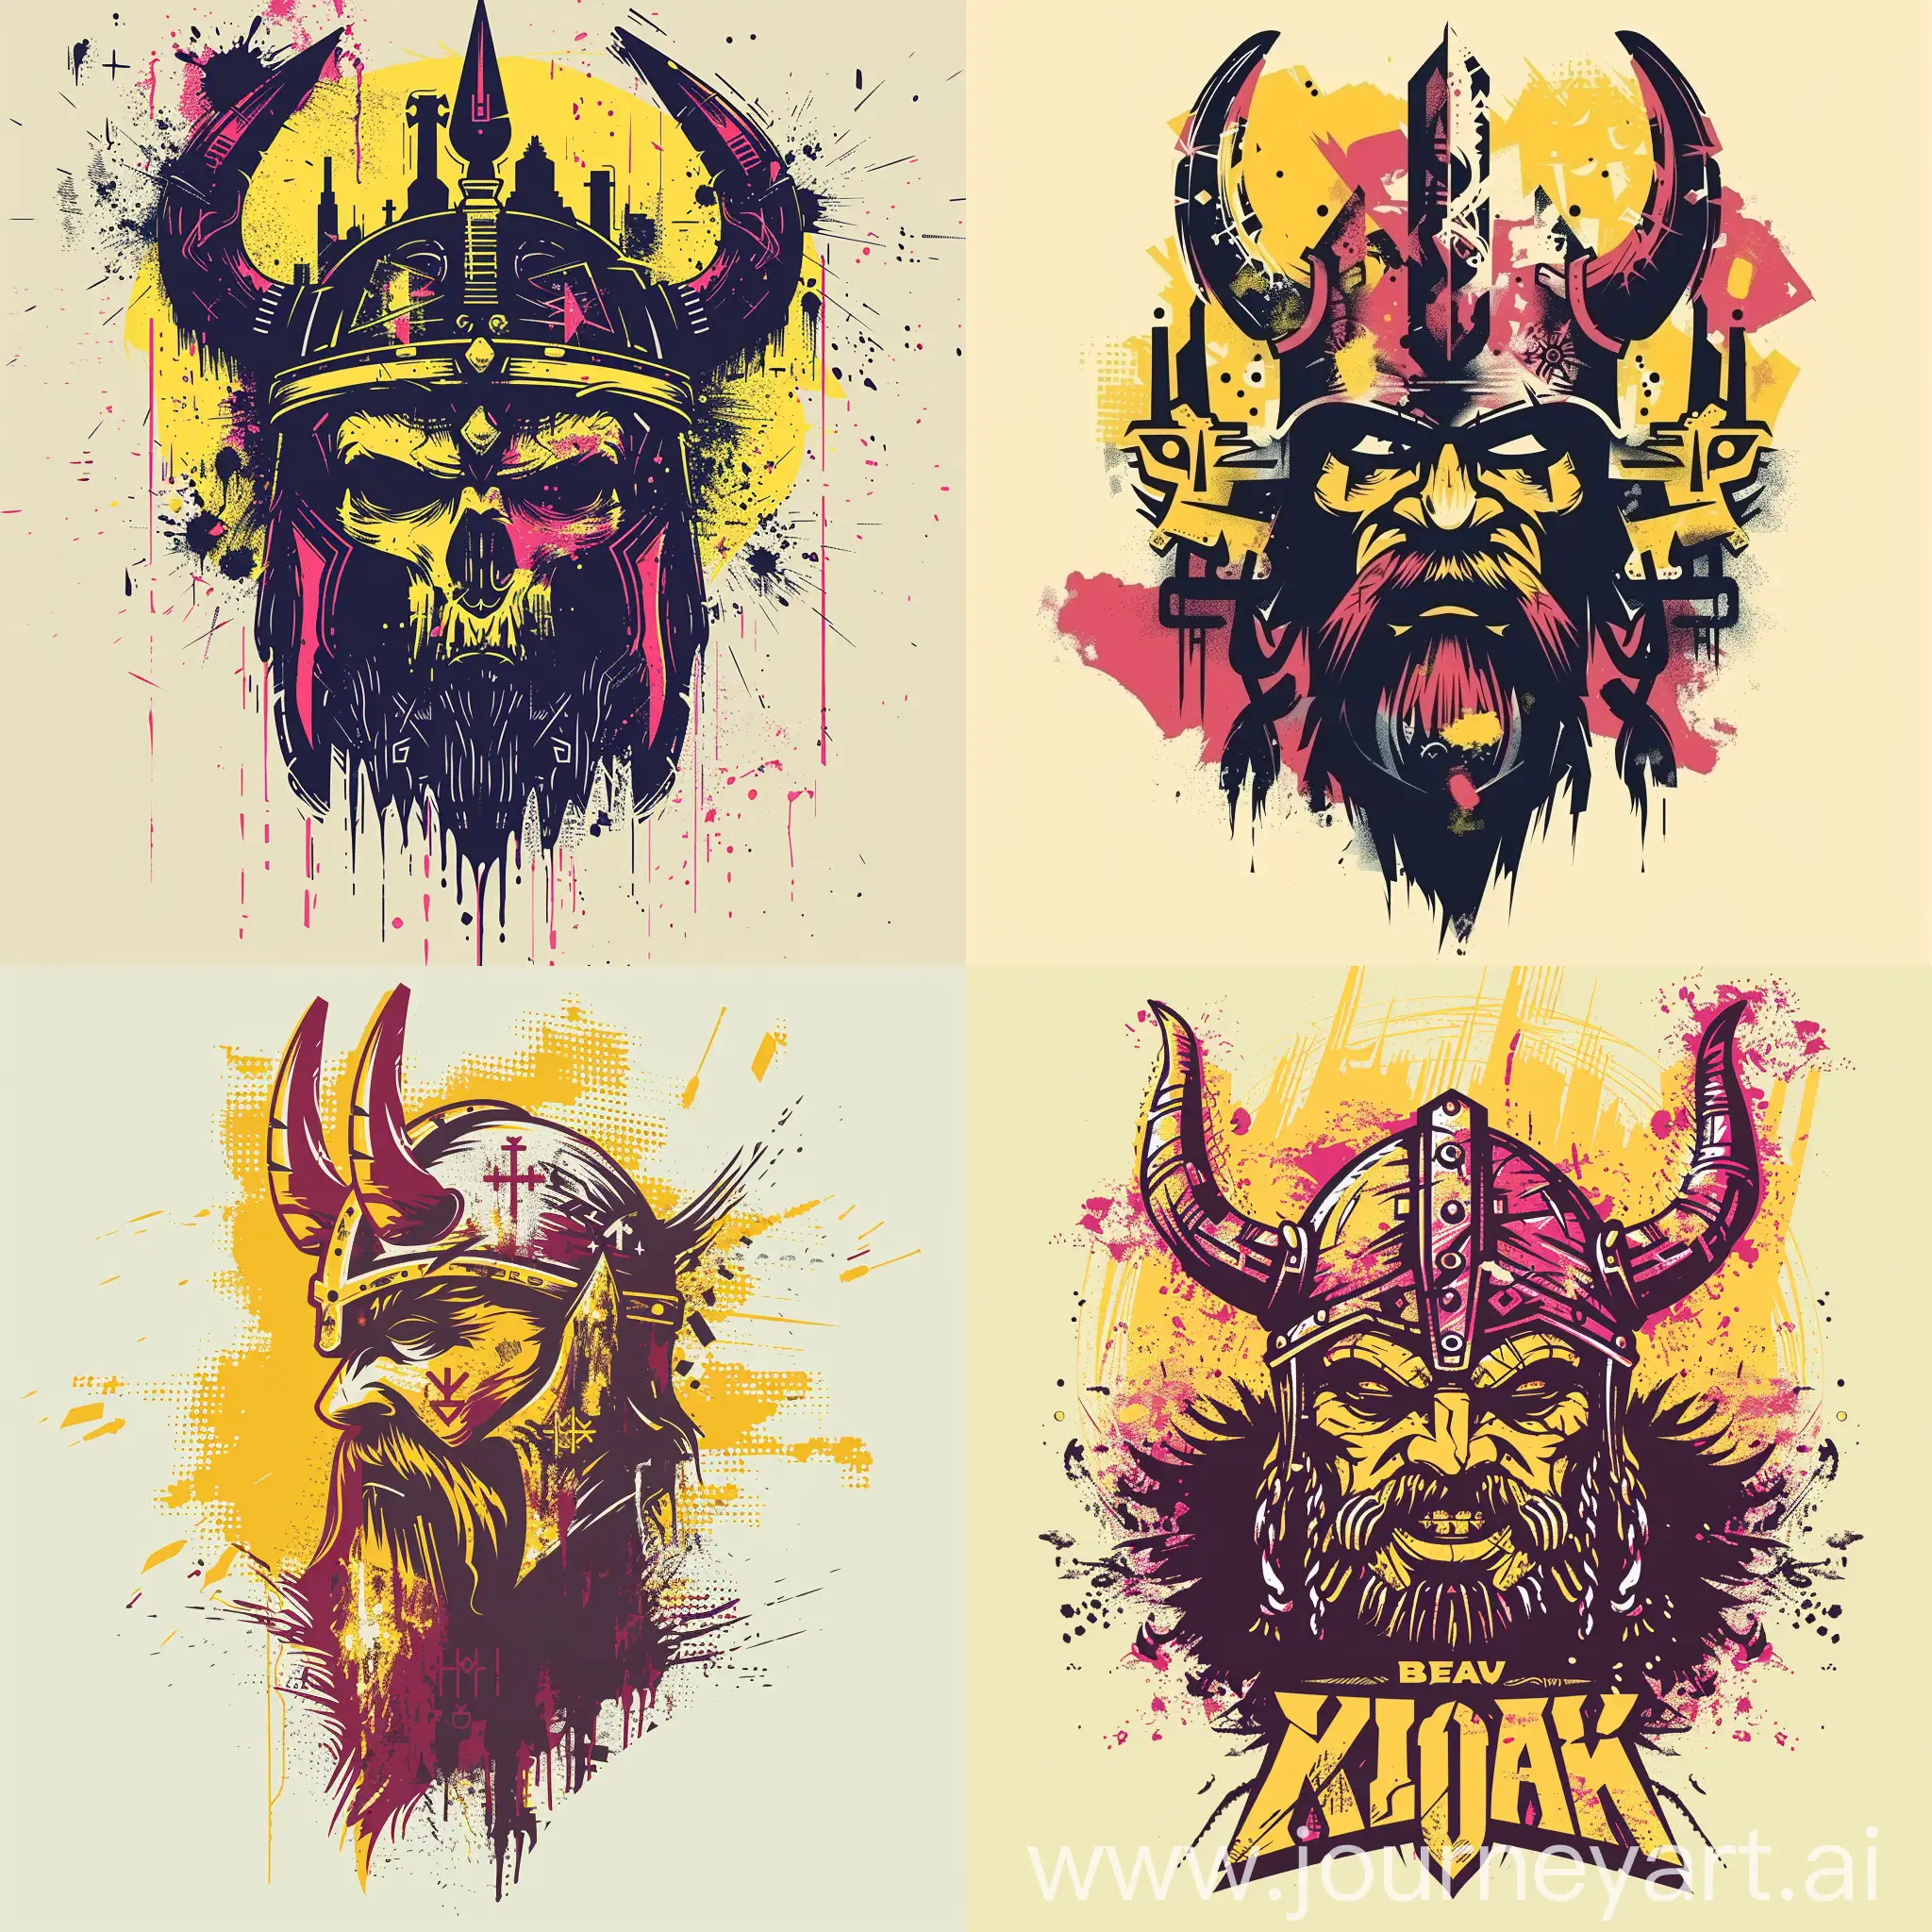 Bold-Viking-Vector-Illustration-Graffiti-Style-City-Portraits-with-Masks-and-Totems